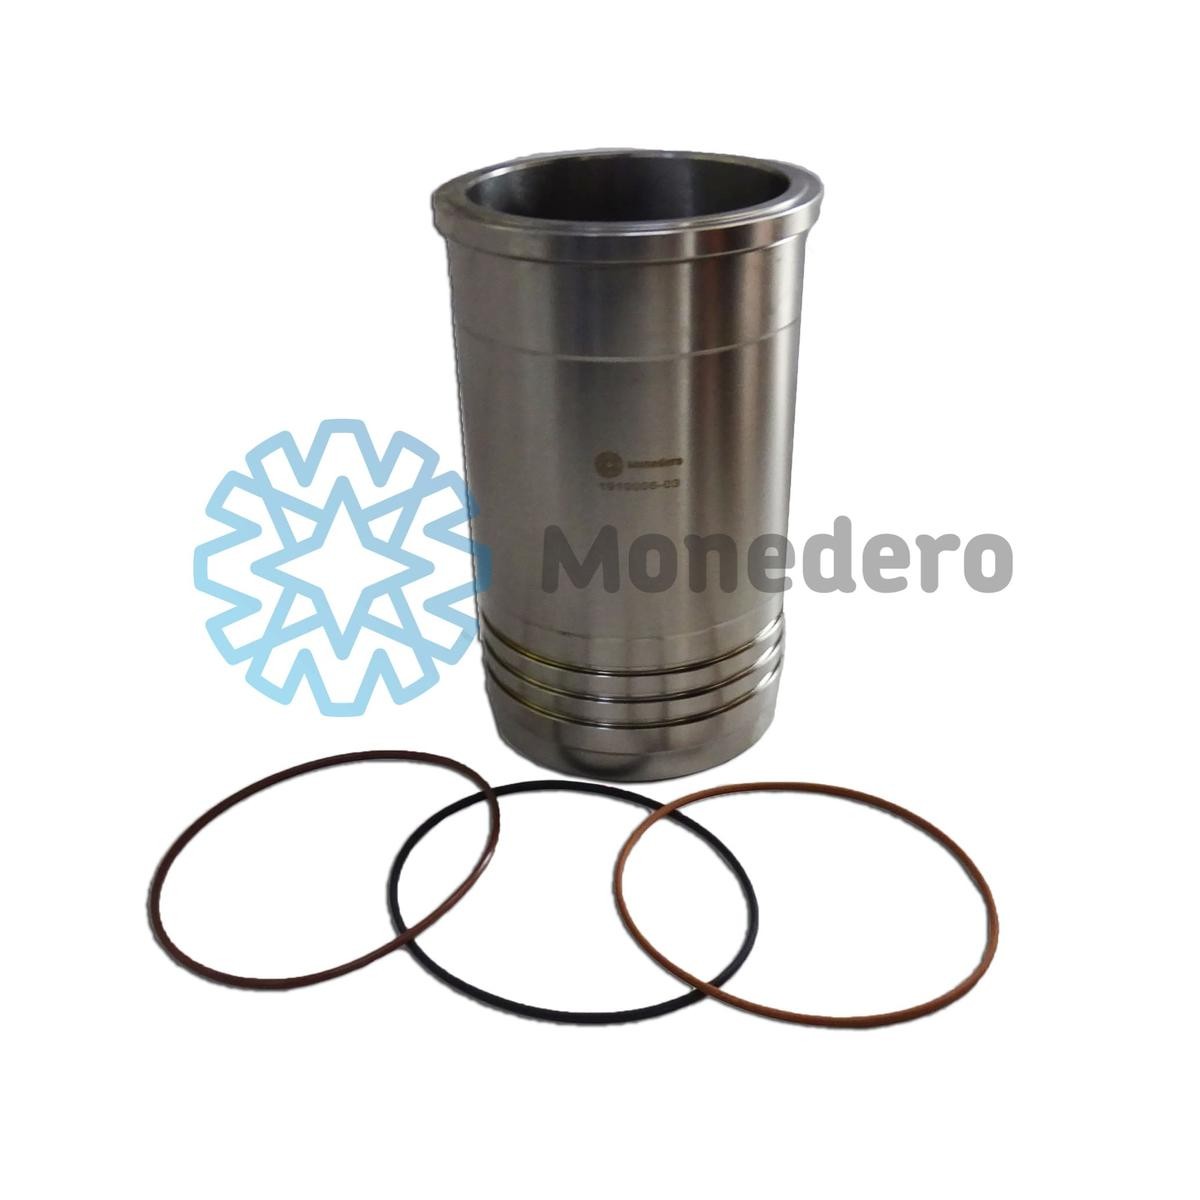 MONEDERO 30011300001 Cylinder Sleeve VOLVO experience and price